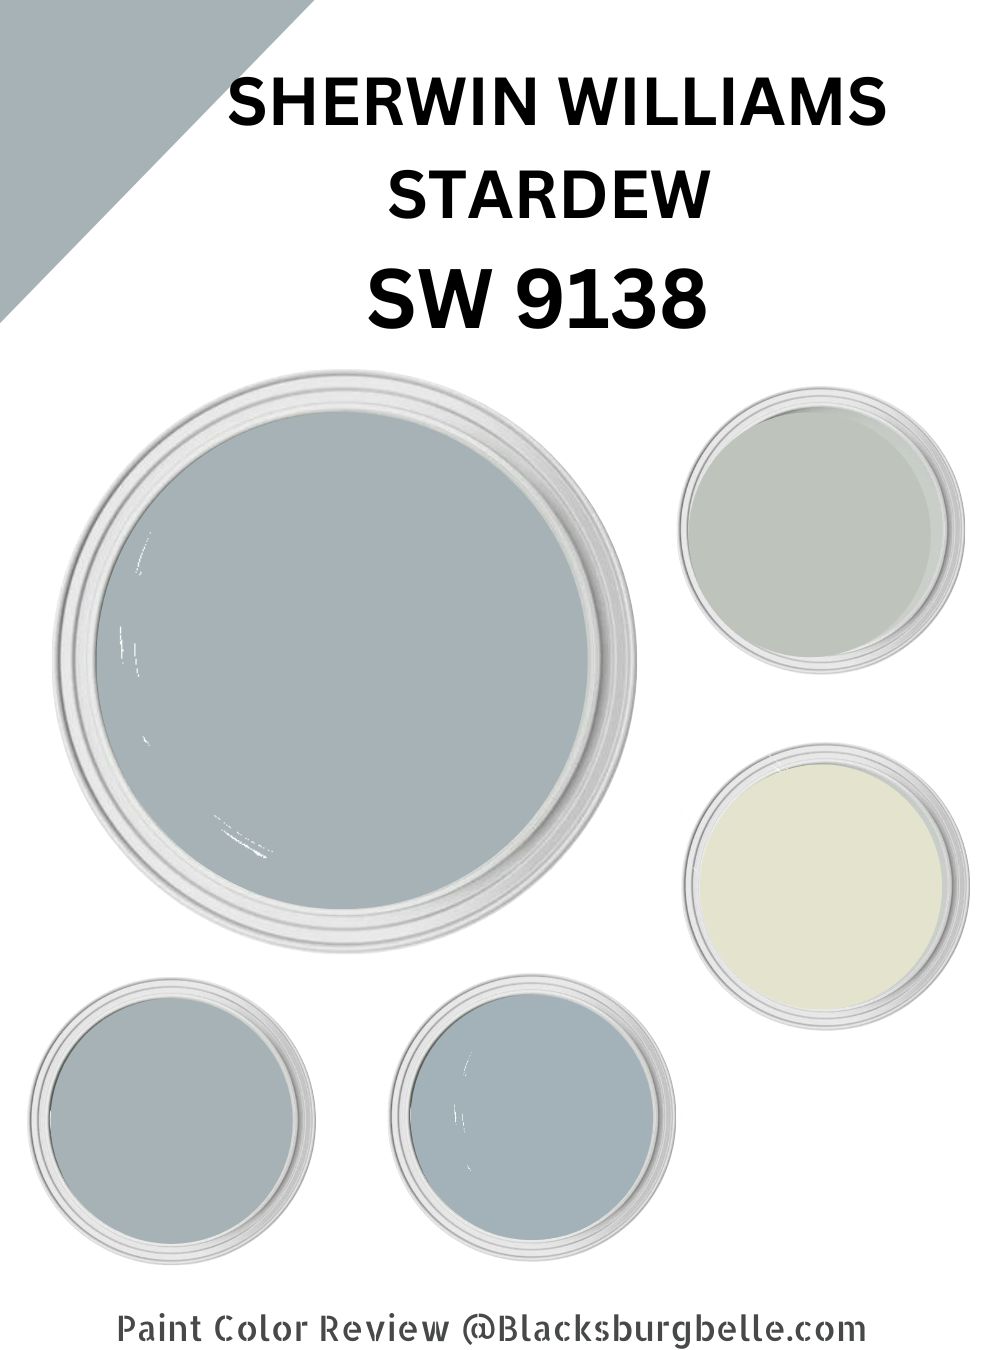 Sherwin Williams Stardew (SW 9138) Paint Color Review & Pics